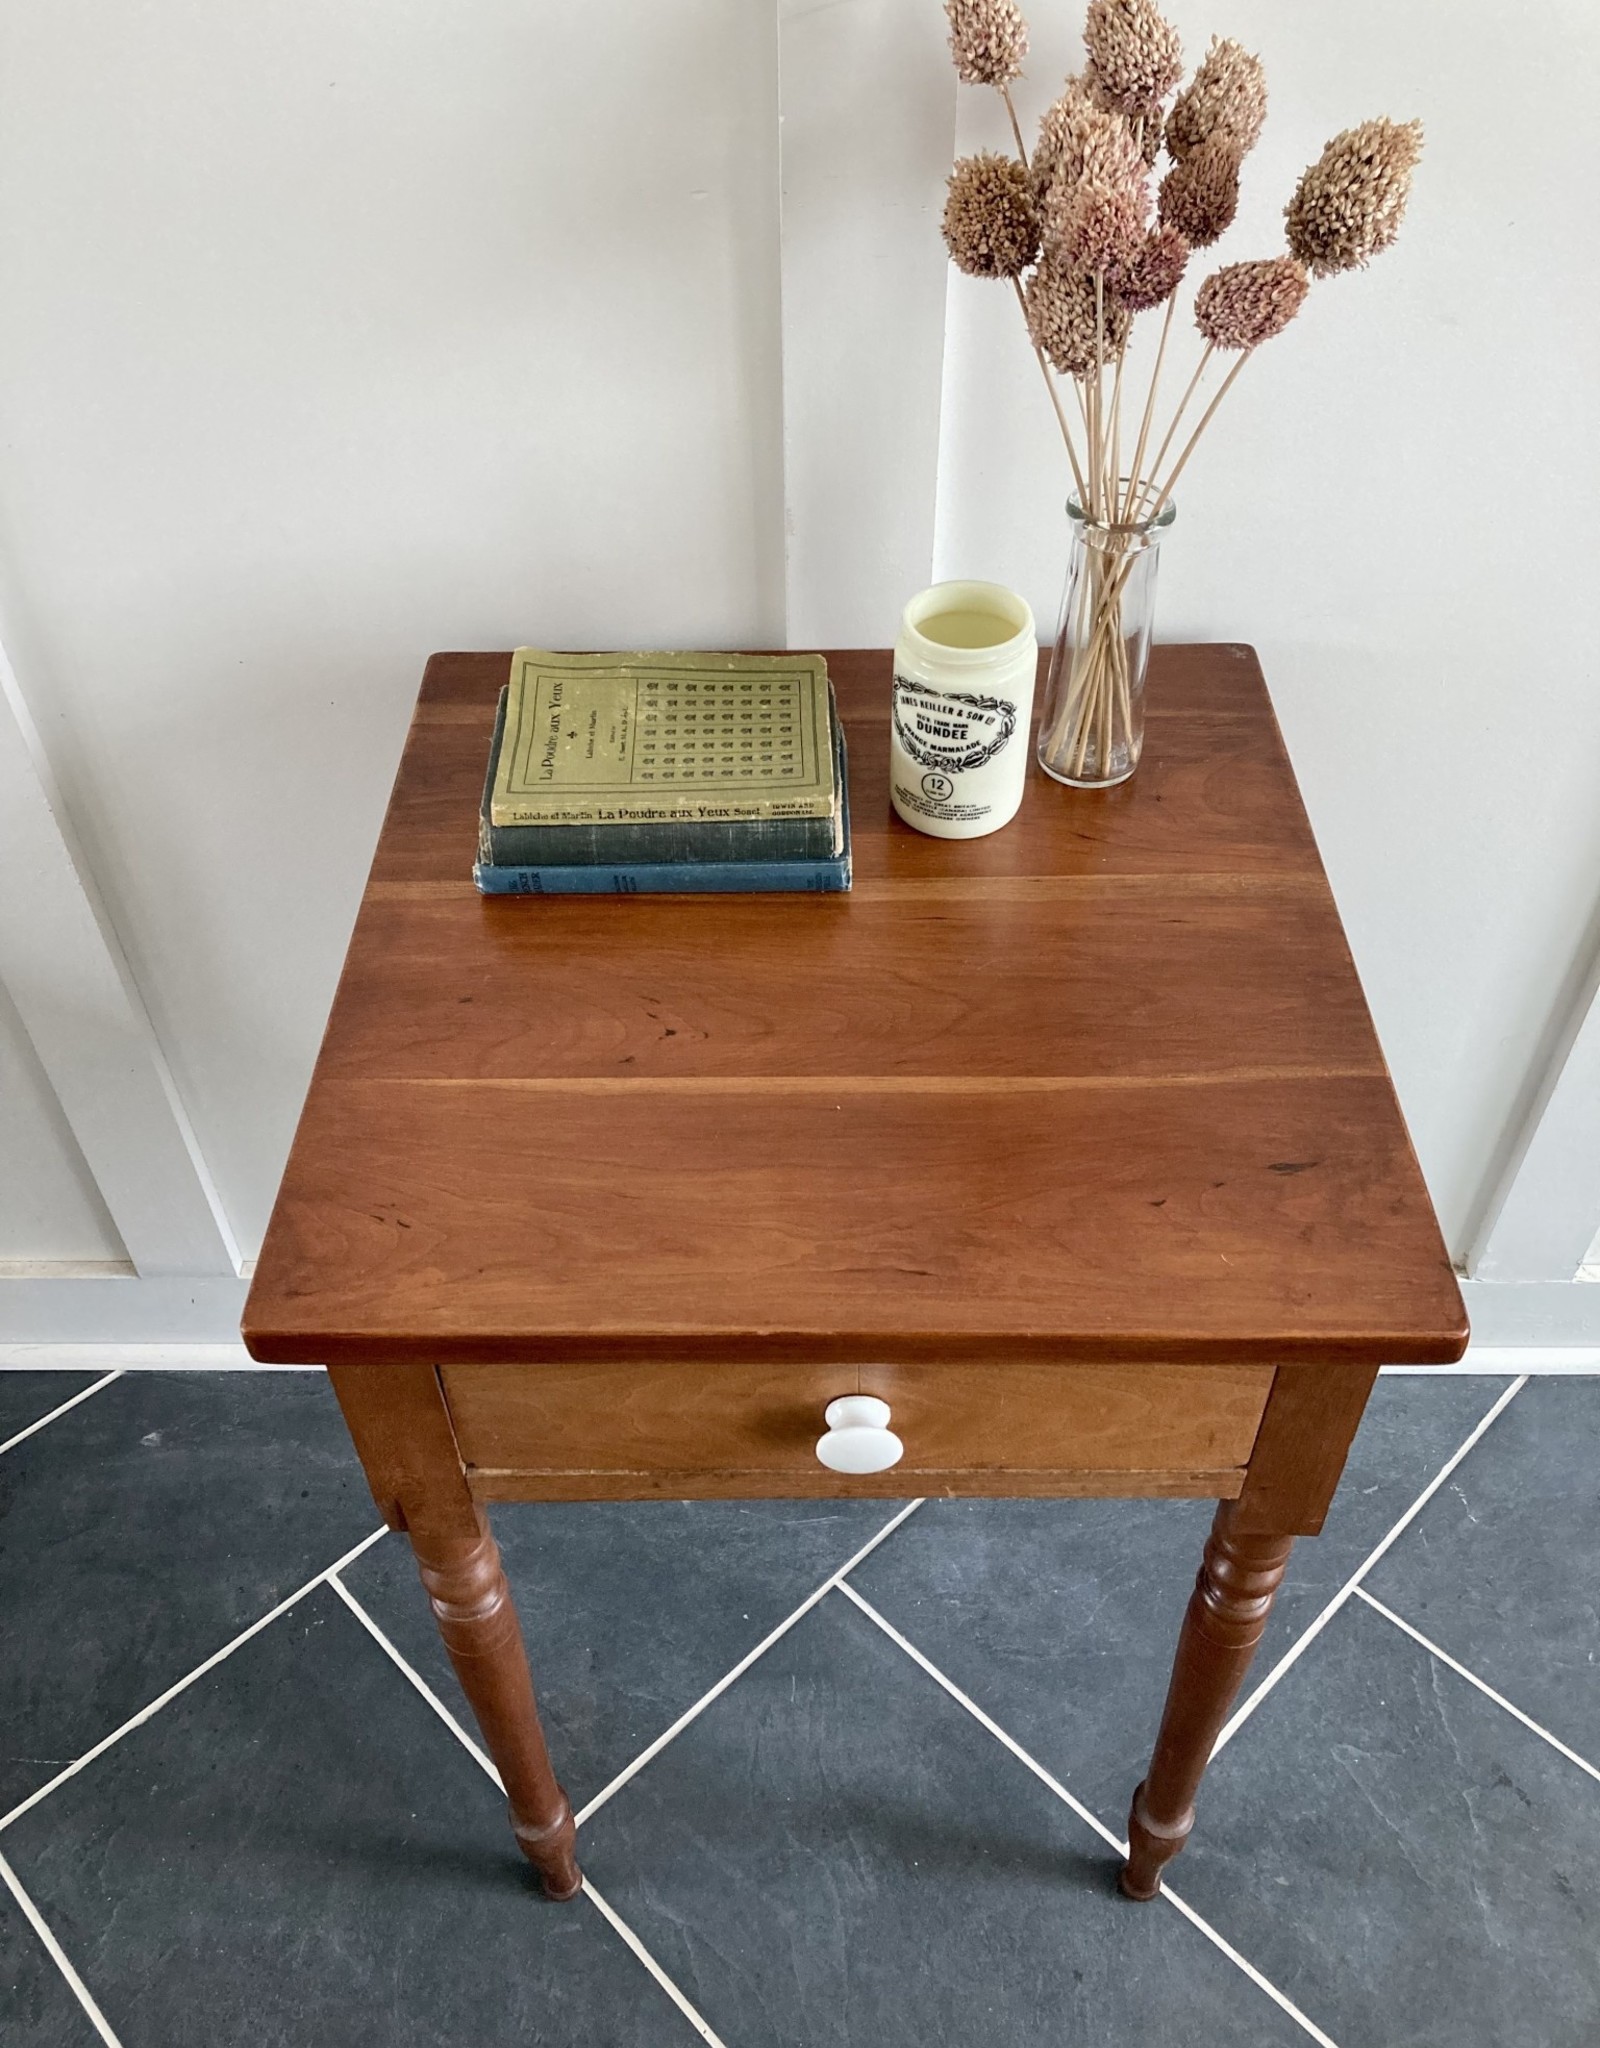 Hansell & Halkett Side Table with Drawer